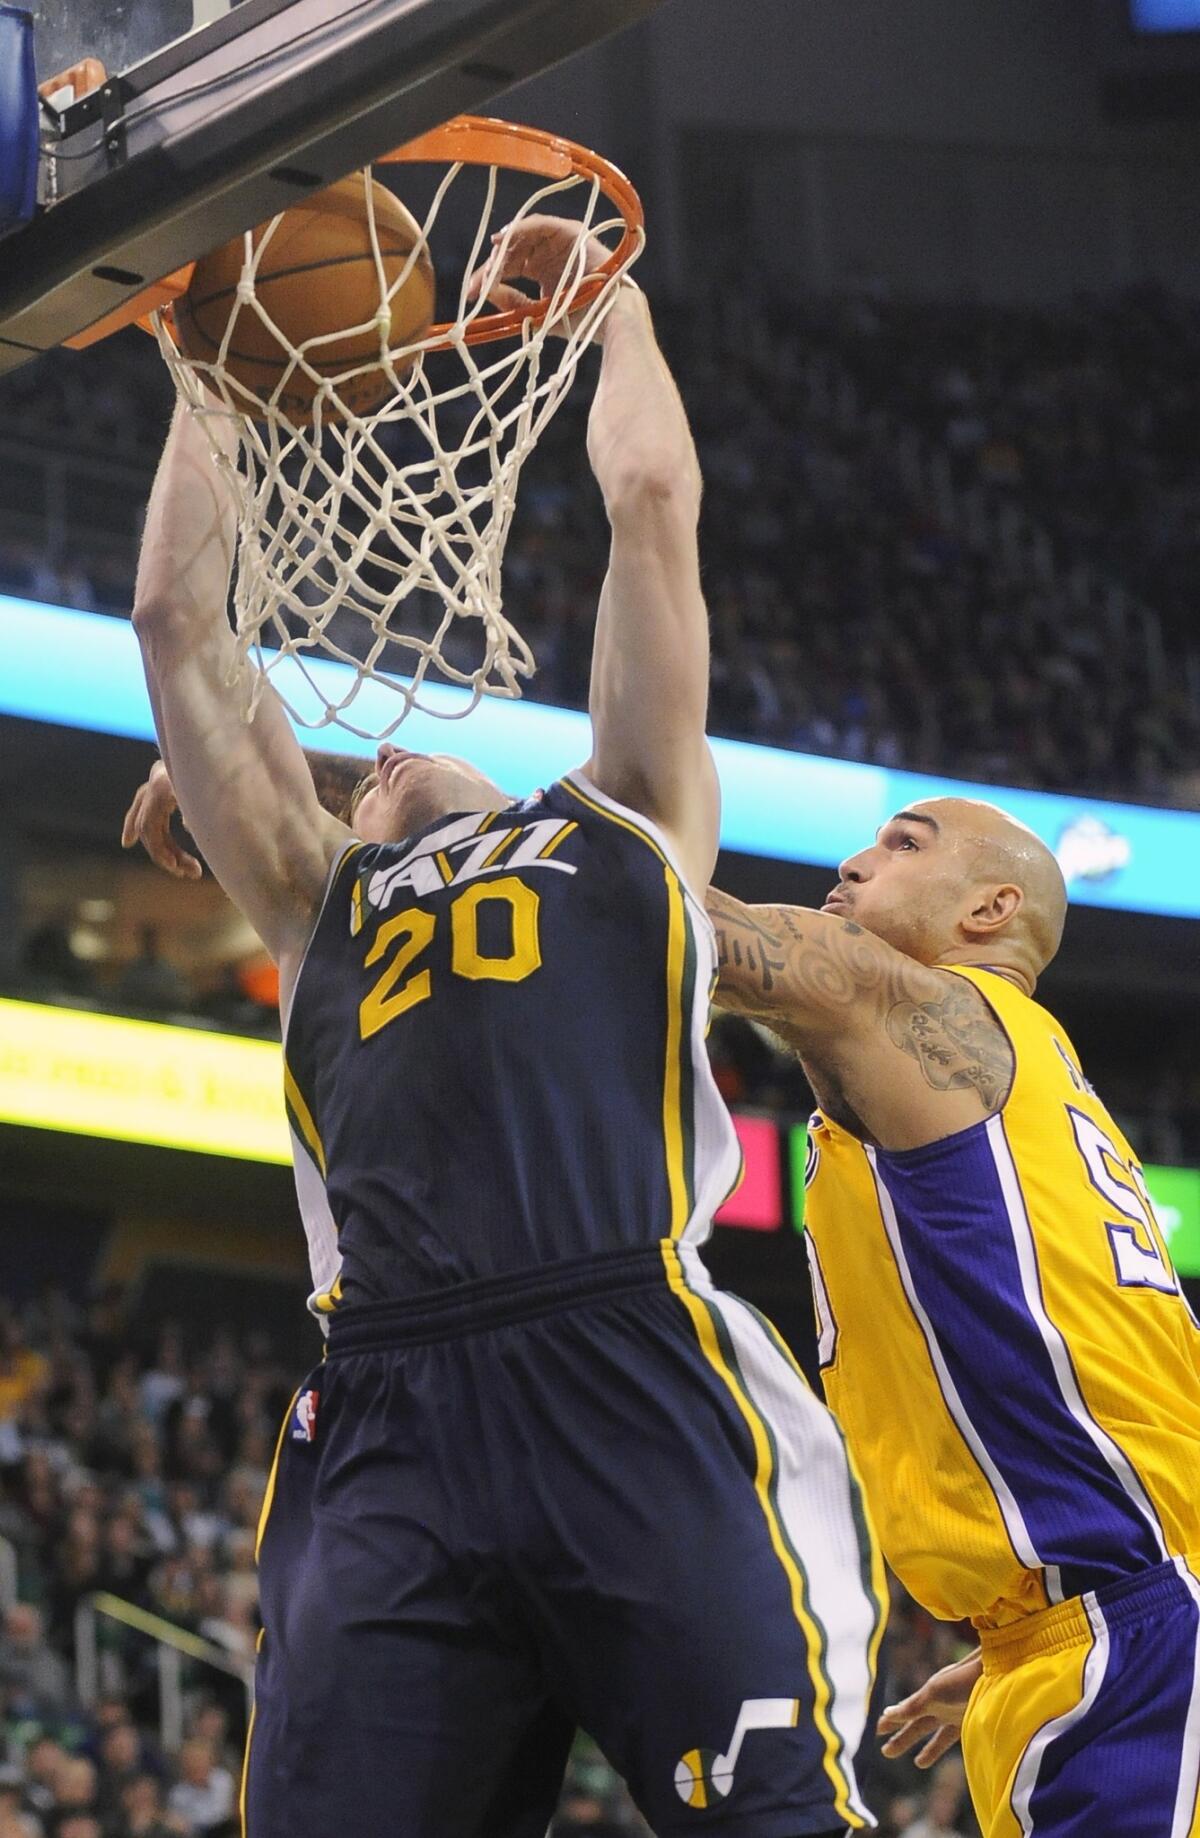 Utah Jazz guard Gordon Hayward, left, dunks in front of Lakers center Robert Sacre during the second half of the Lakers' 105-103 loss Friday.